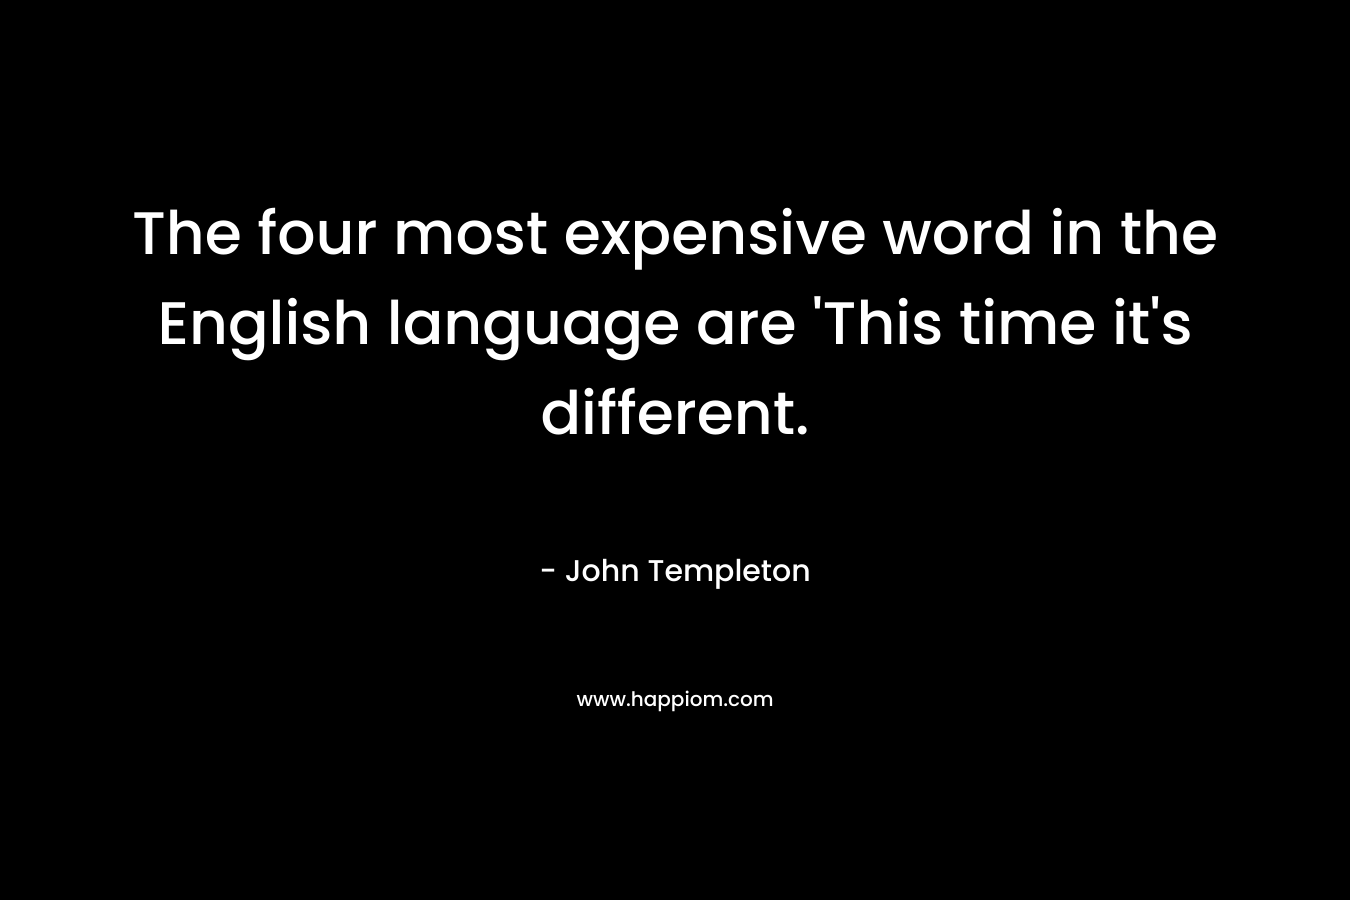 The four most expensive word in the English language are 'This time it's different.